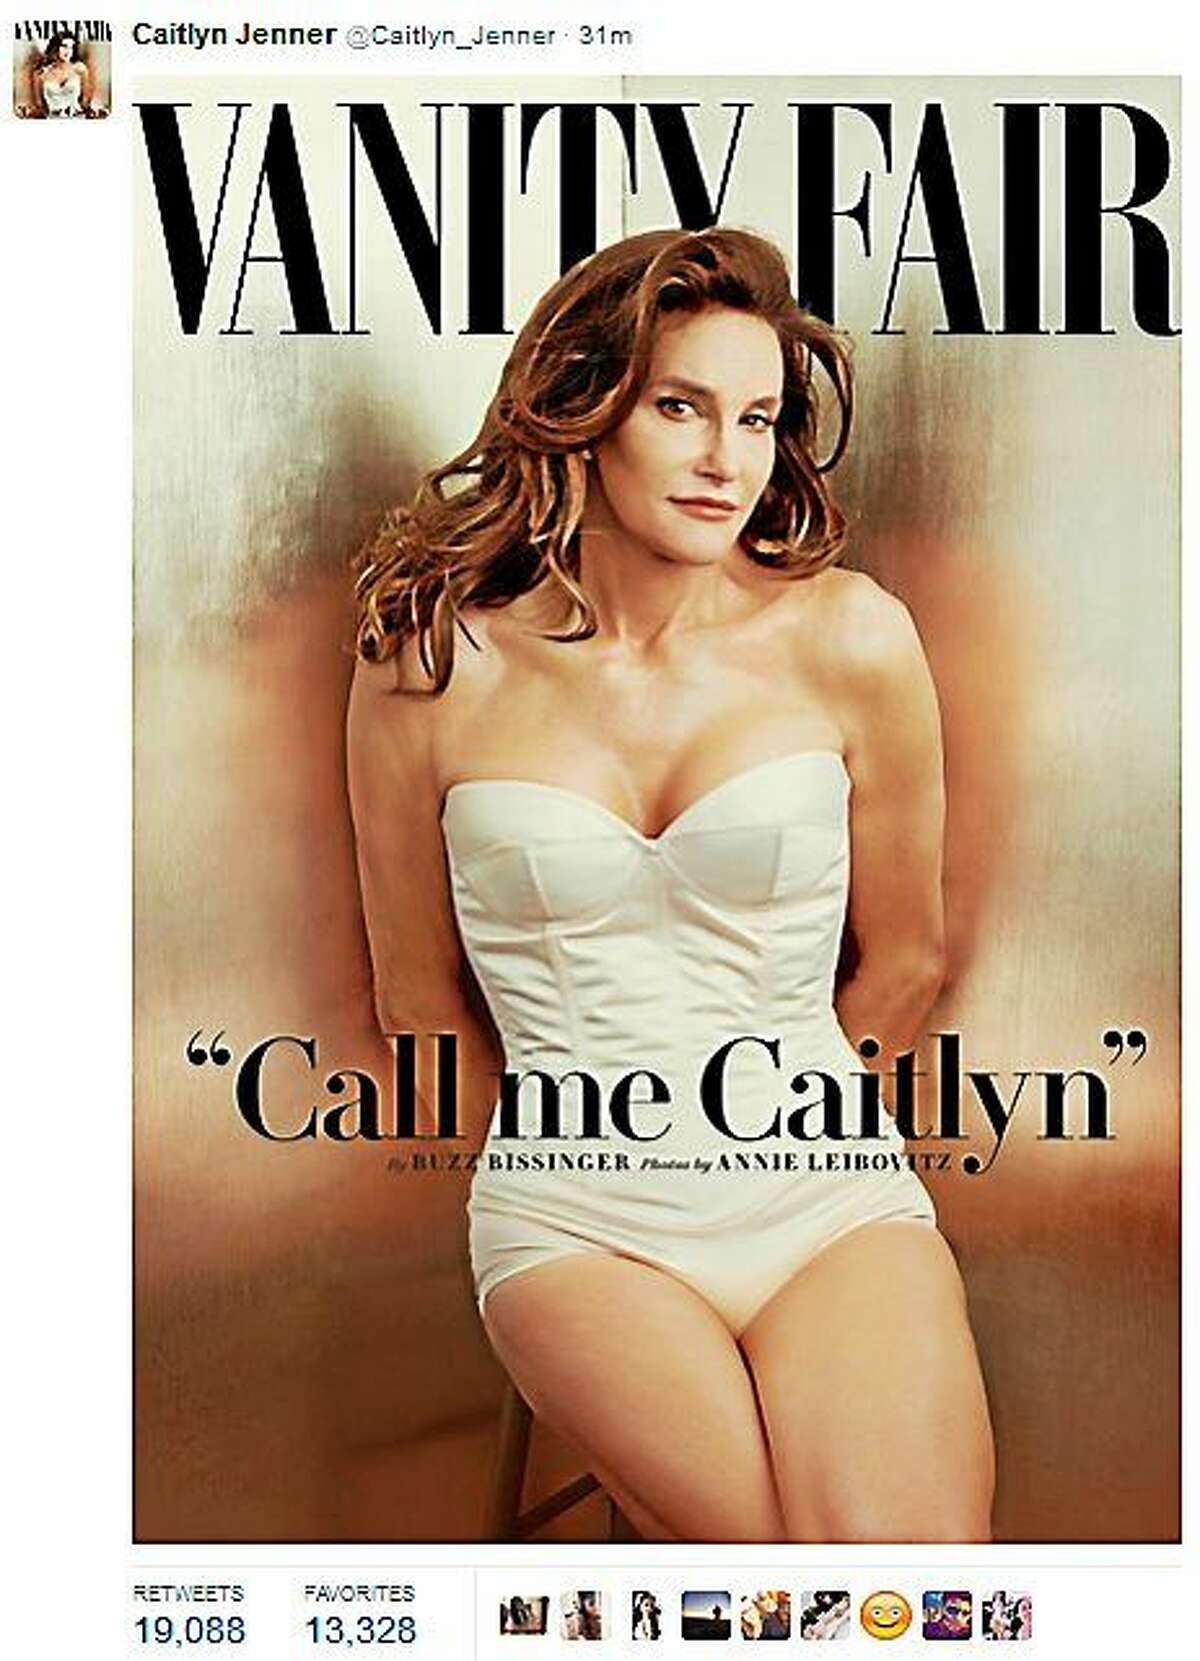 Bruce Jenner debuts as Caitlyn Jenner on the July issue of Vanity Fair.